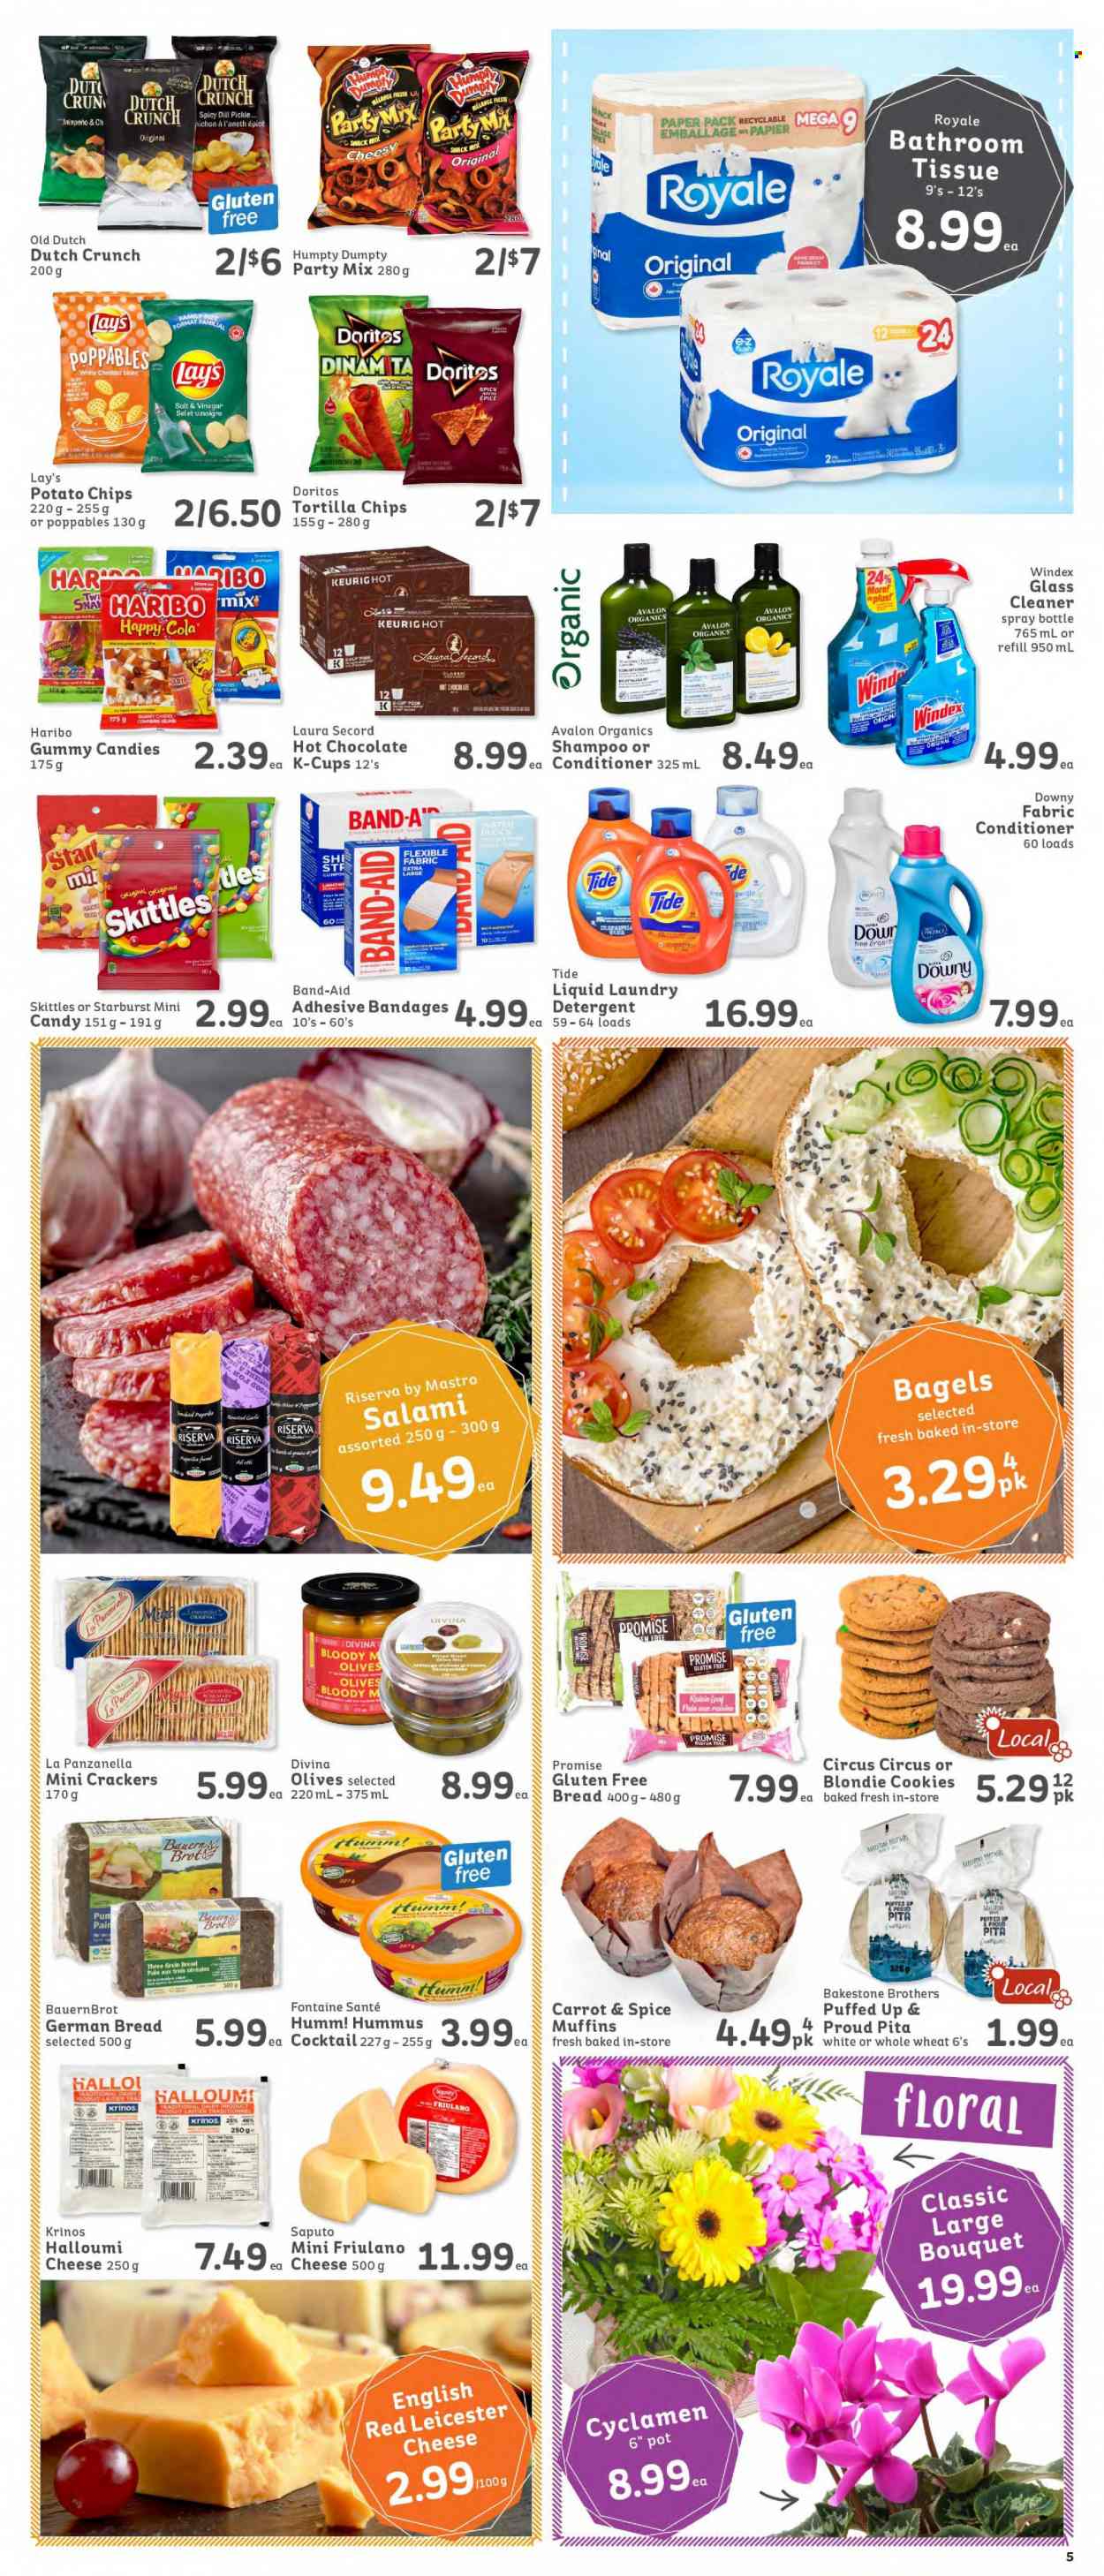 thumbnail - IGA Simple Goodness Flyer - November 05, 2021 - November 11, 2021 - Sales products - bagels, bread, pita, muffin, jalapeño, salami, hummus, Red Leicester, halloumi, cheese, cookies, Haribo, crackers, Skittles, Starburst, Doritos, tortilla chips, potato chips, Lay’s, spice, dried fruit, hot chocolate, coffee capsules, K-Cups, wine, BROTHERS, band-aid, raisins, olives, chips. Page 5.